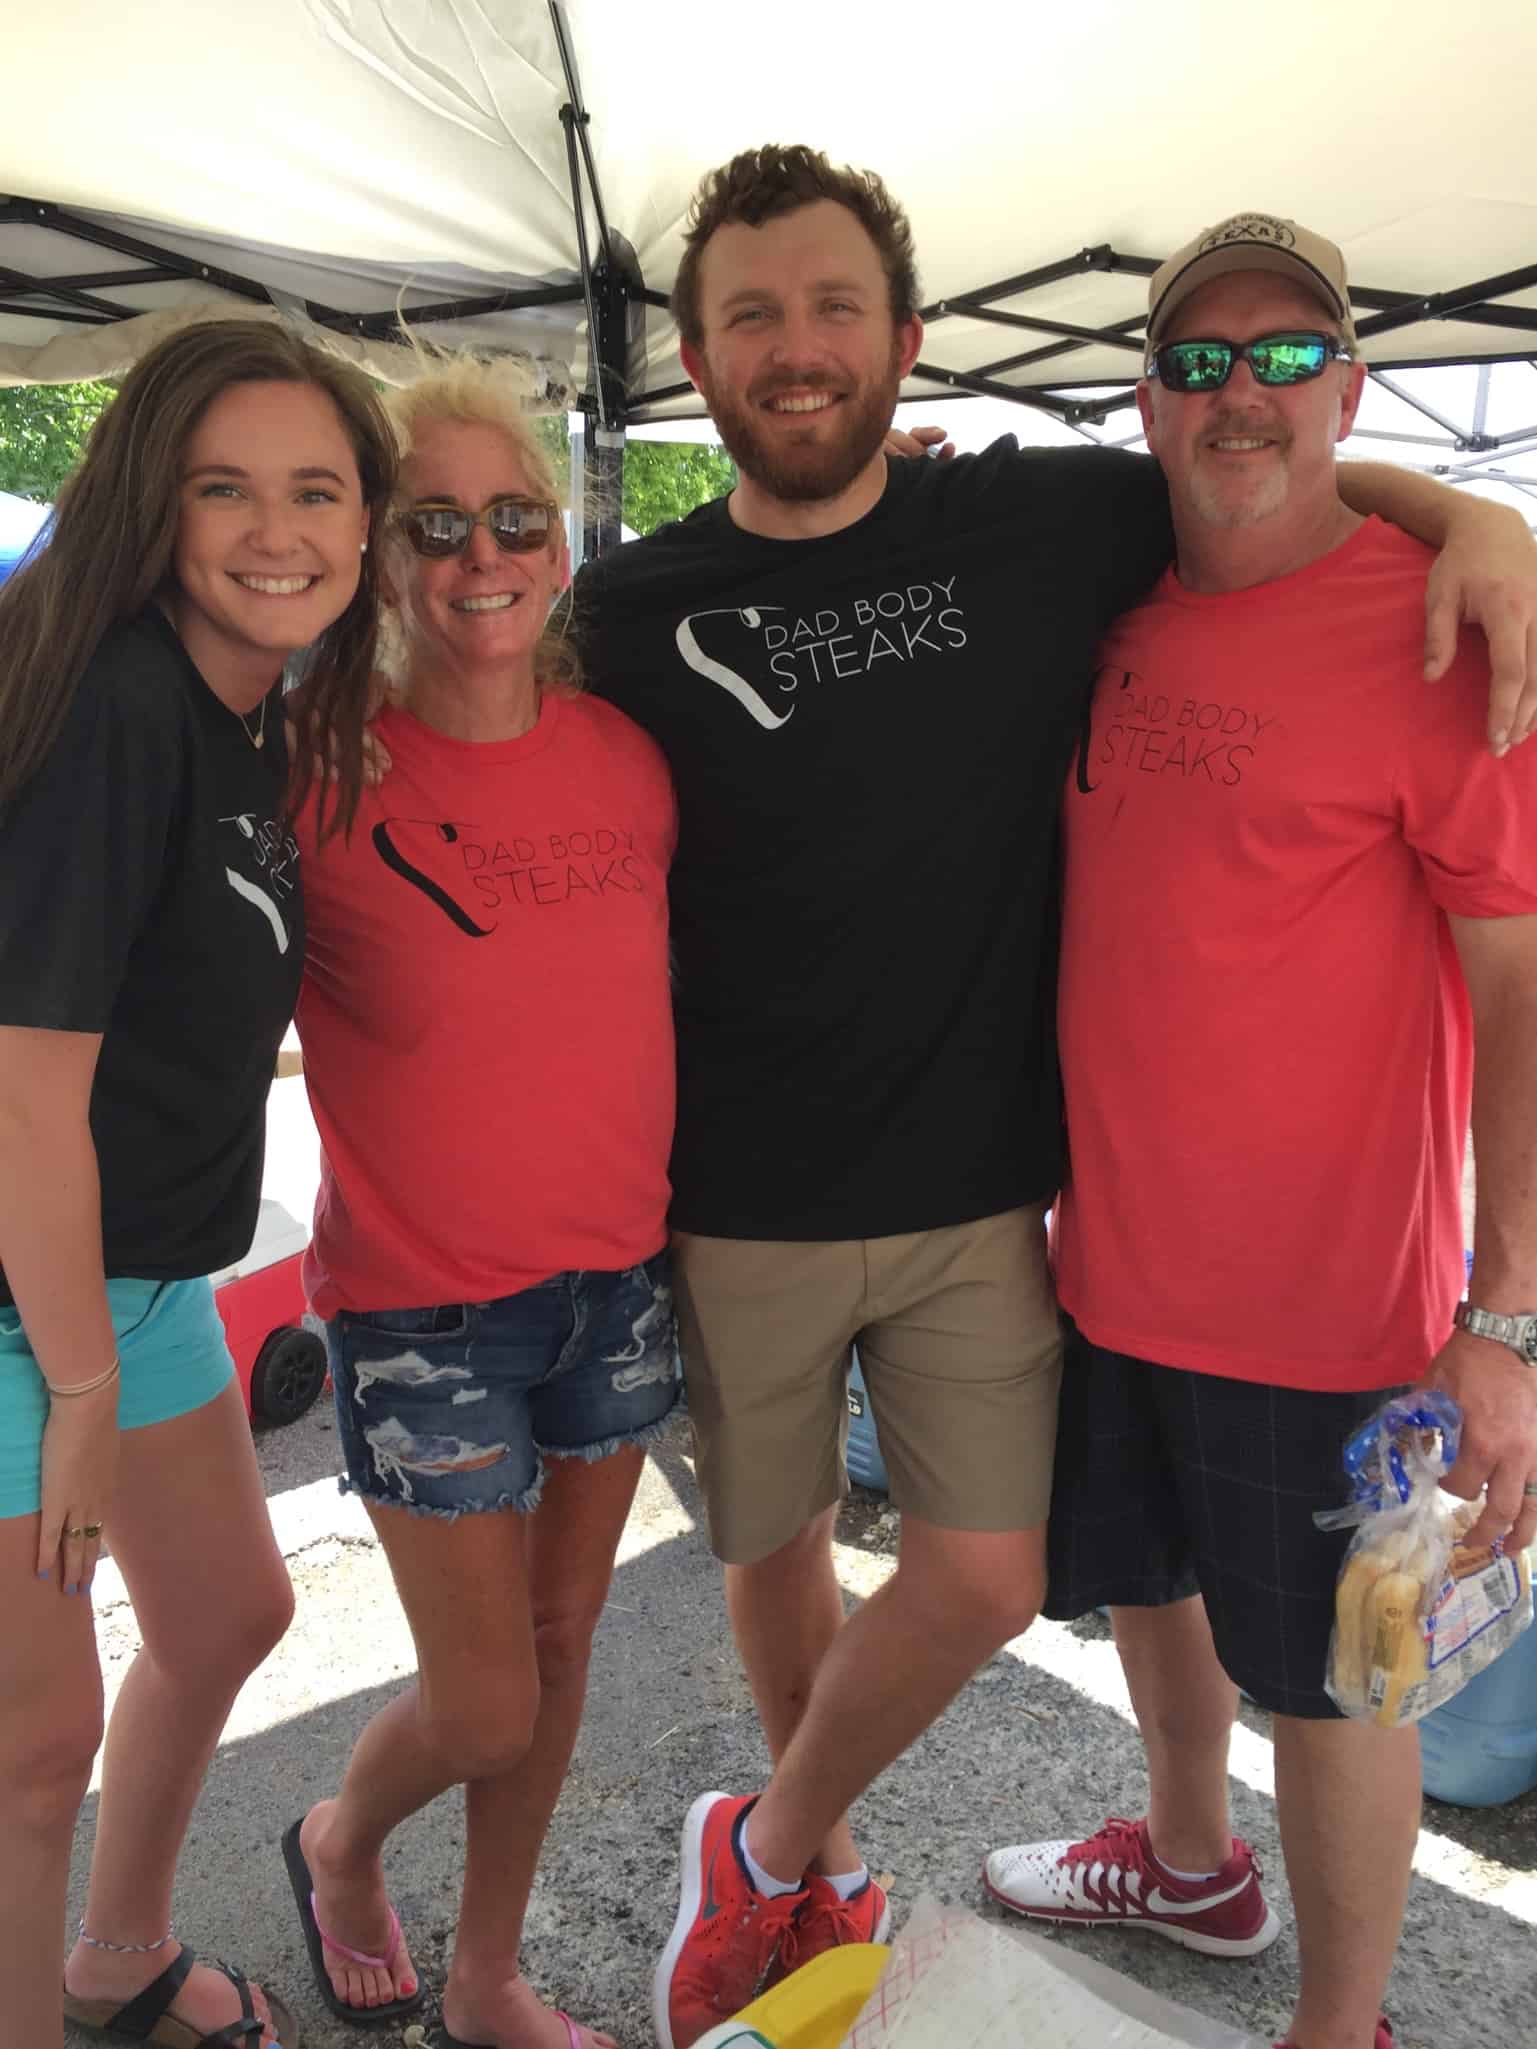 The Morris family participates in the Hico Steak Cook-Off each year. Their team name? Dad Body Steaks. 